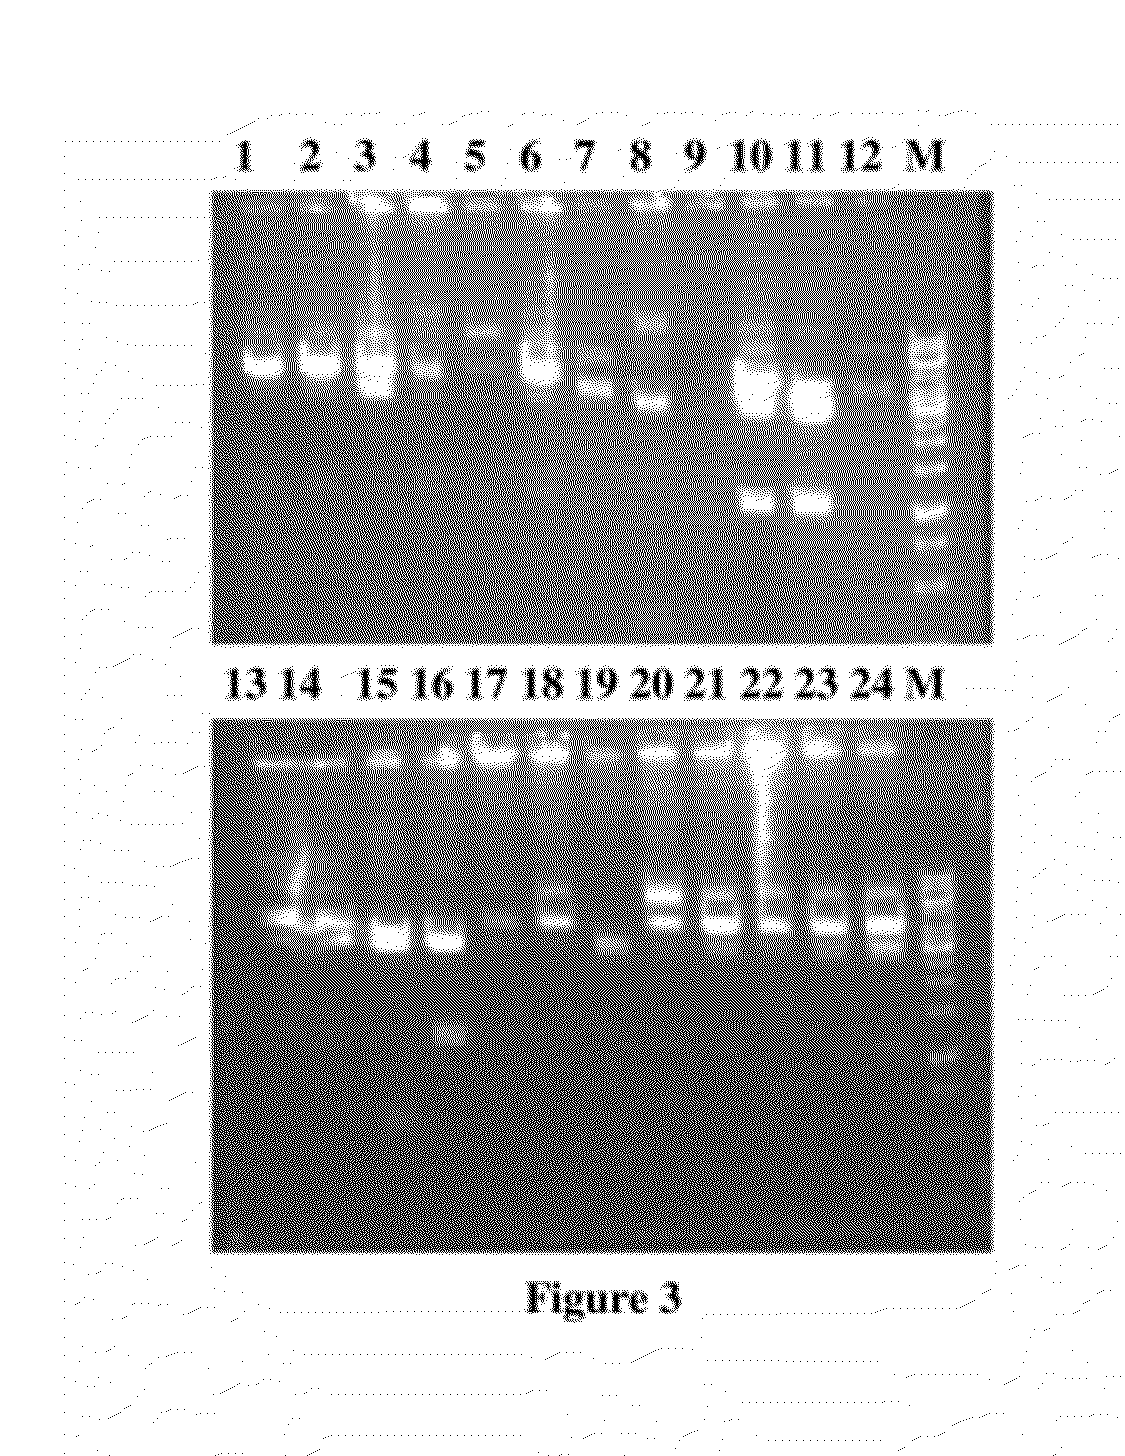 Novel fusion proteins and method of expression thereof